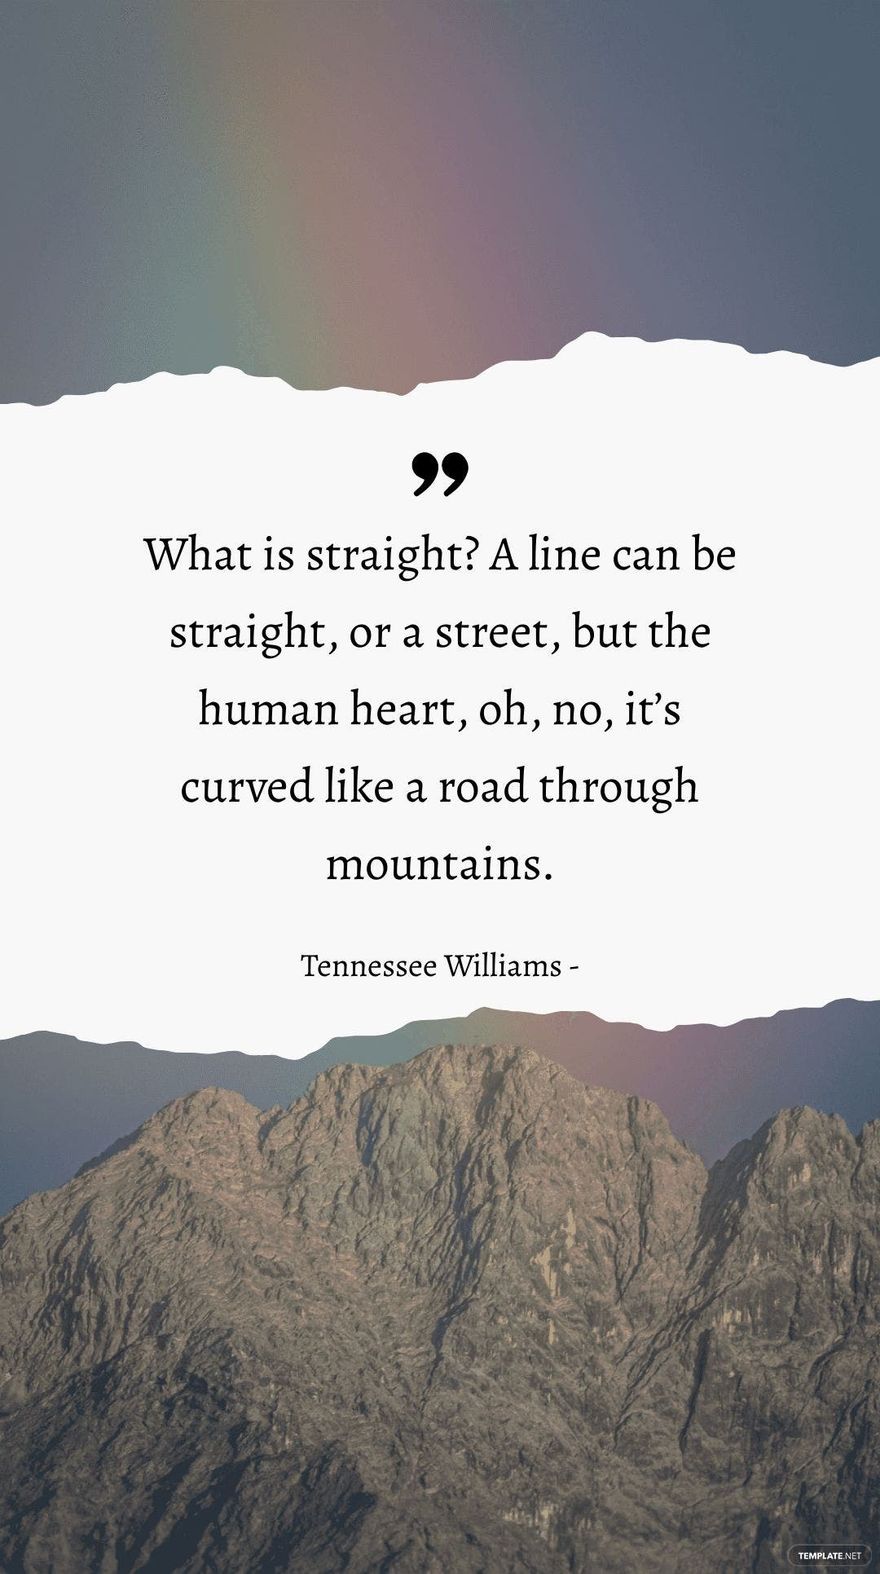 Free Tennessee Williams - What is straight? A line can be straight, or a street, but the human heart, oh, no, it’s curved like a road through mountains. in JPG